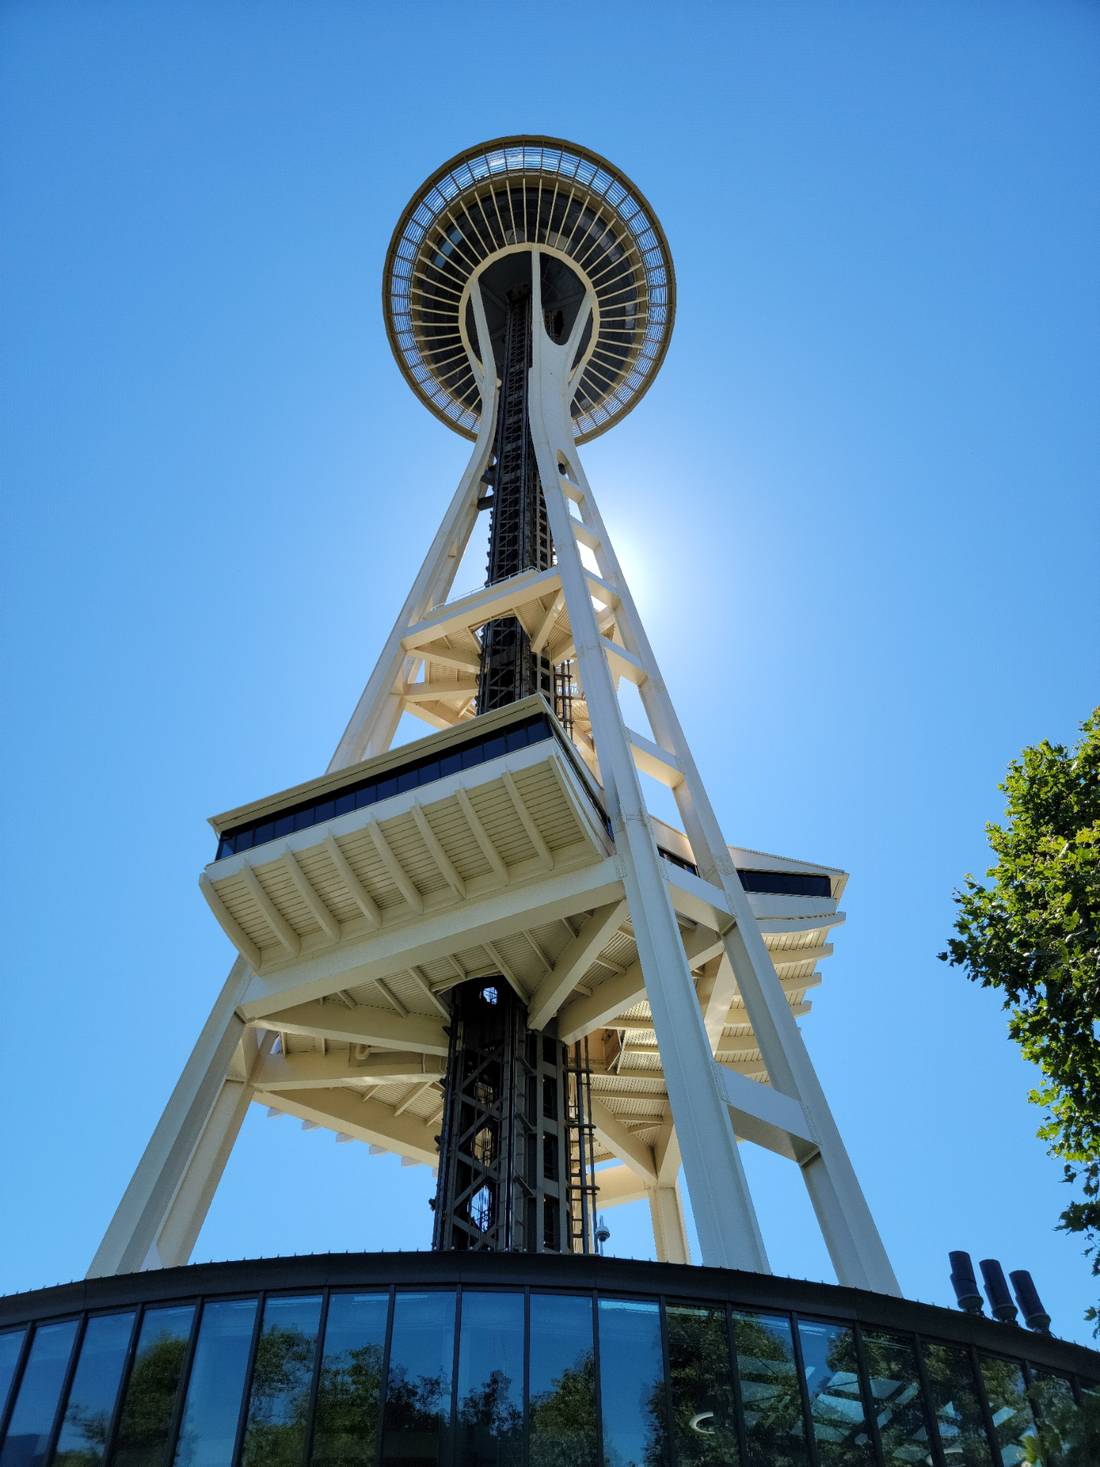 A view from ground level looking up at the Space Needle